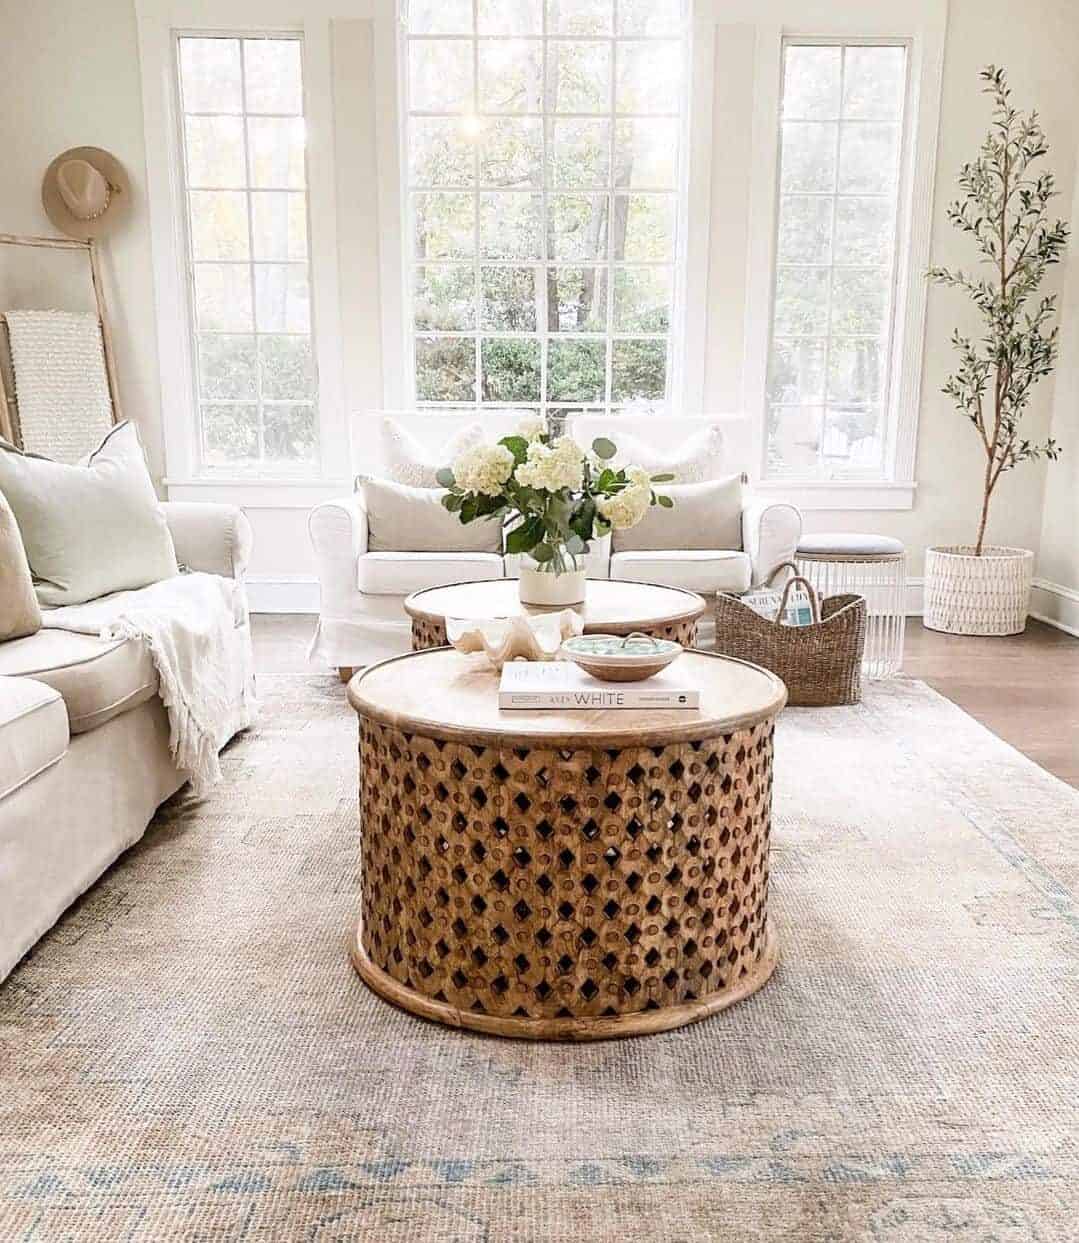 Living Room With Textured Wood Coffee Tables - Soul & Lane